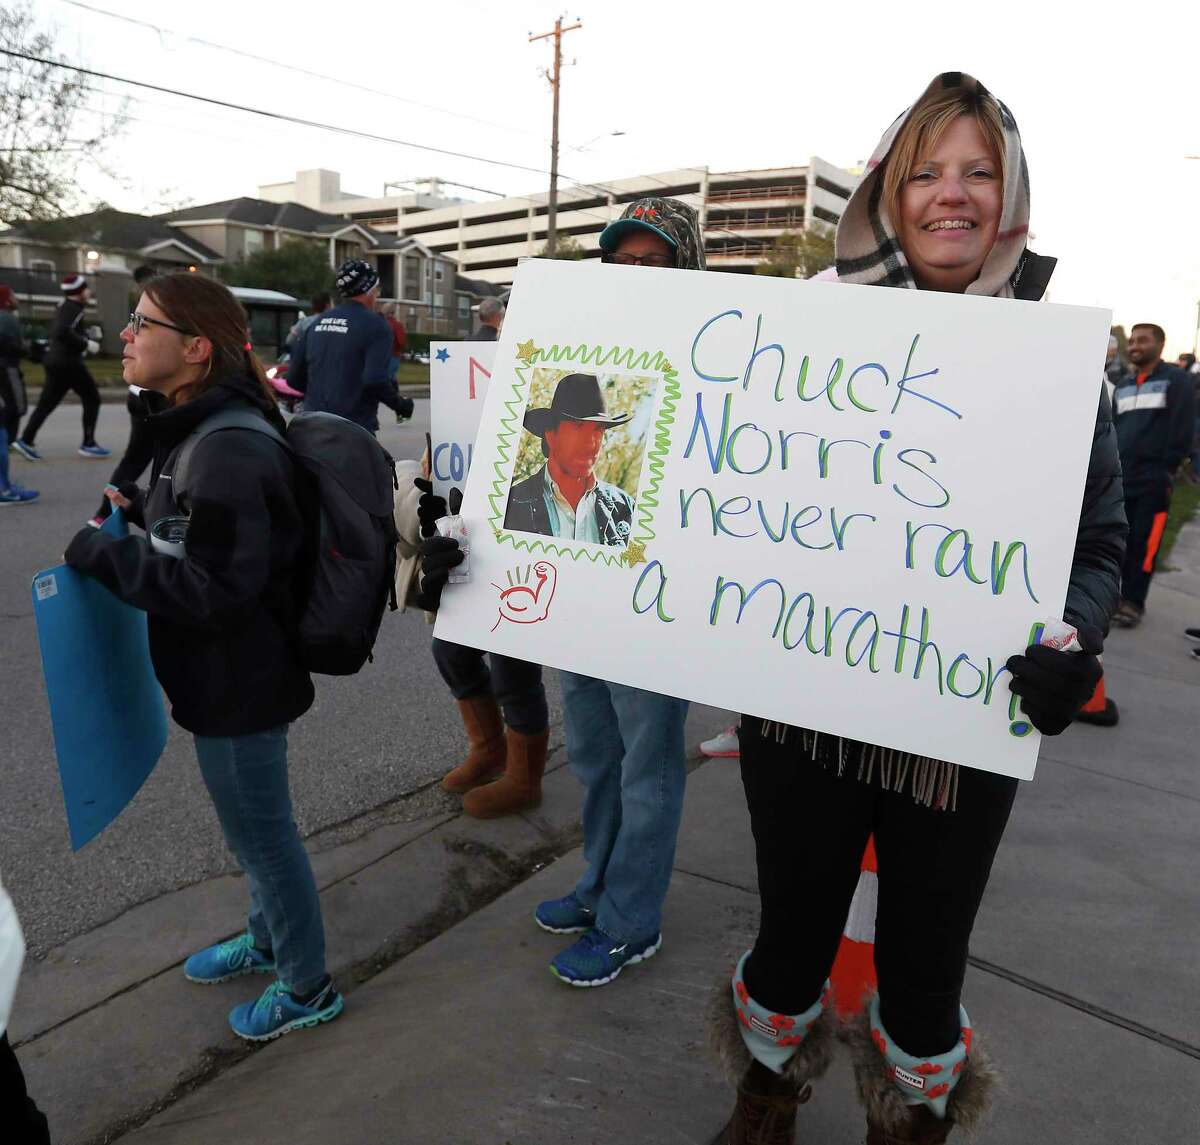 Supporters cheer on runners with signs on Washington Avenue during the Chevron Houston Marathon, Sunday, Jan. 20, 2019, in Houston.